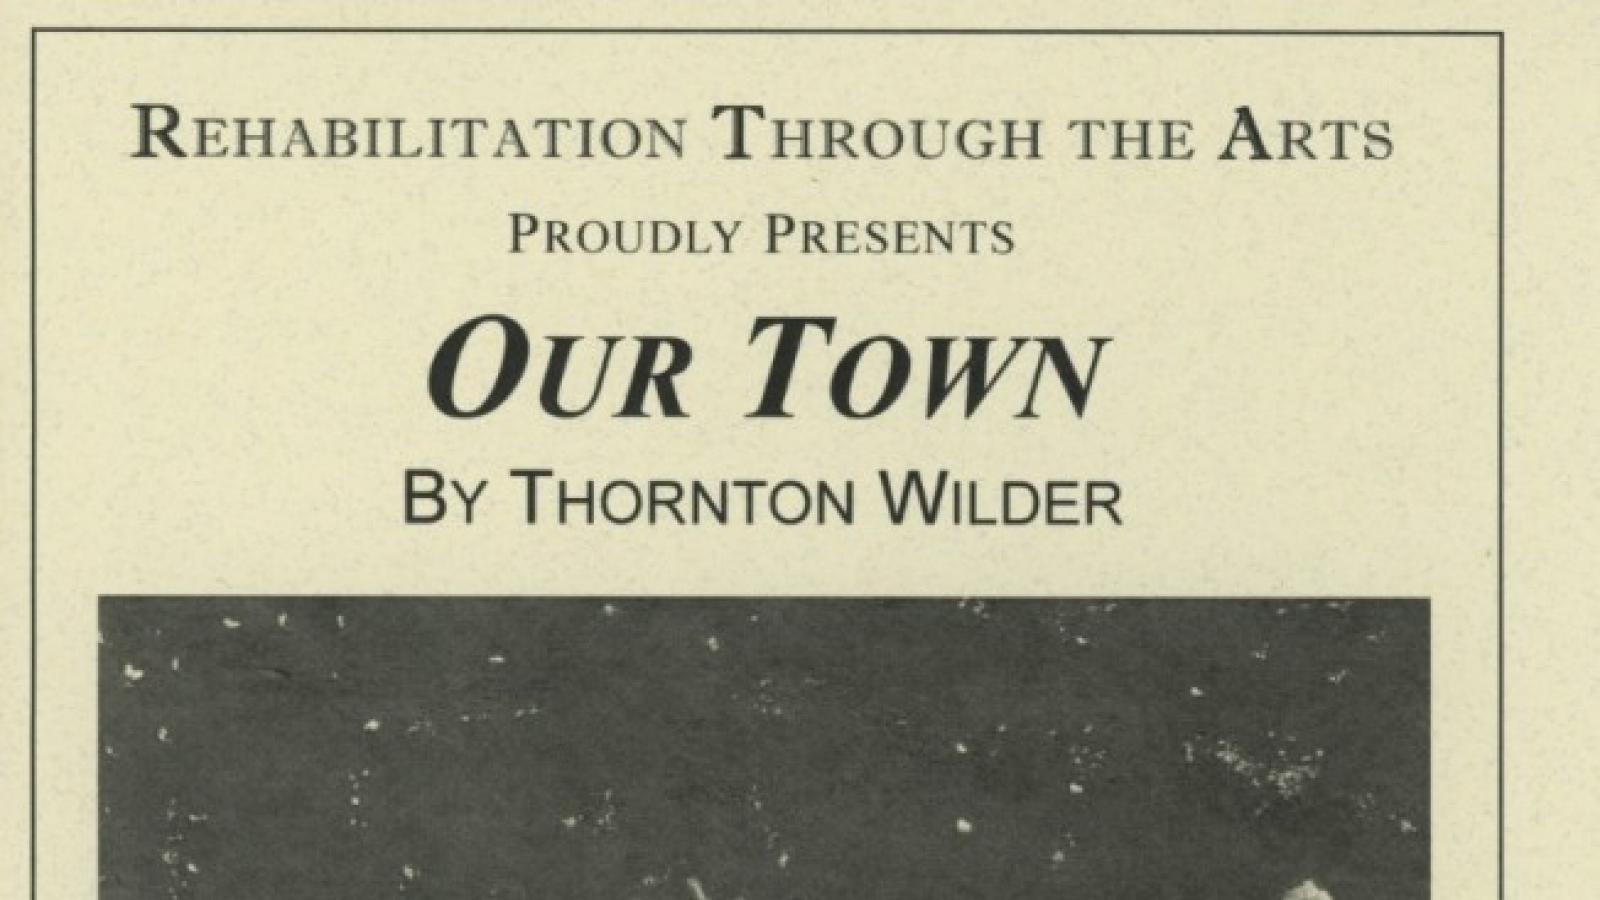 The program cover of a recent production of "Our Town "staged at Sing Sing Correctional Facility. Image courtesy of Howard Sherman